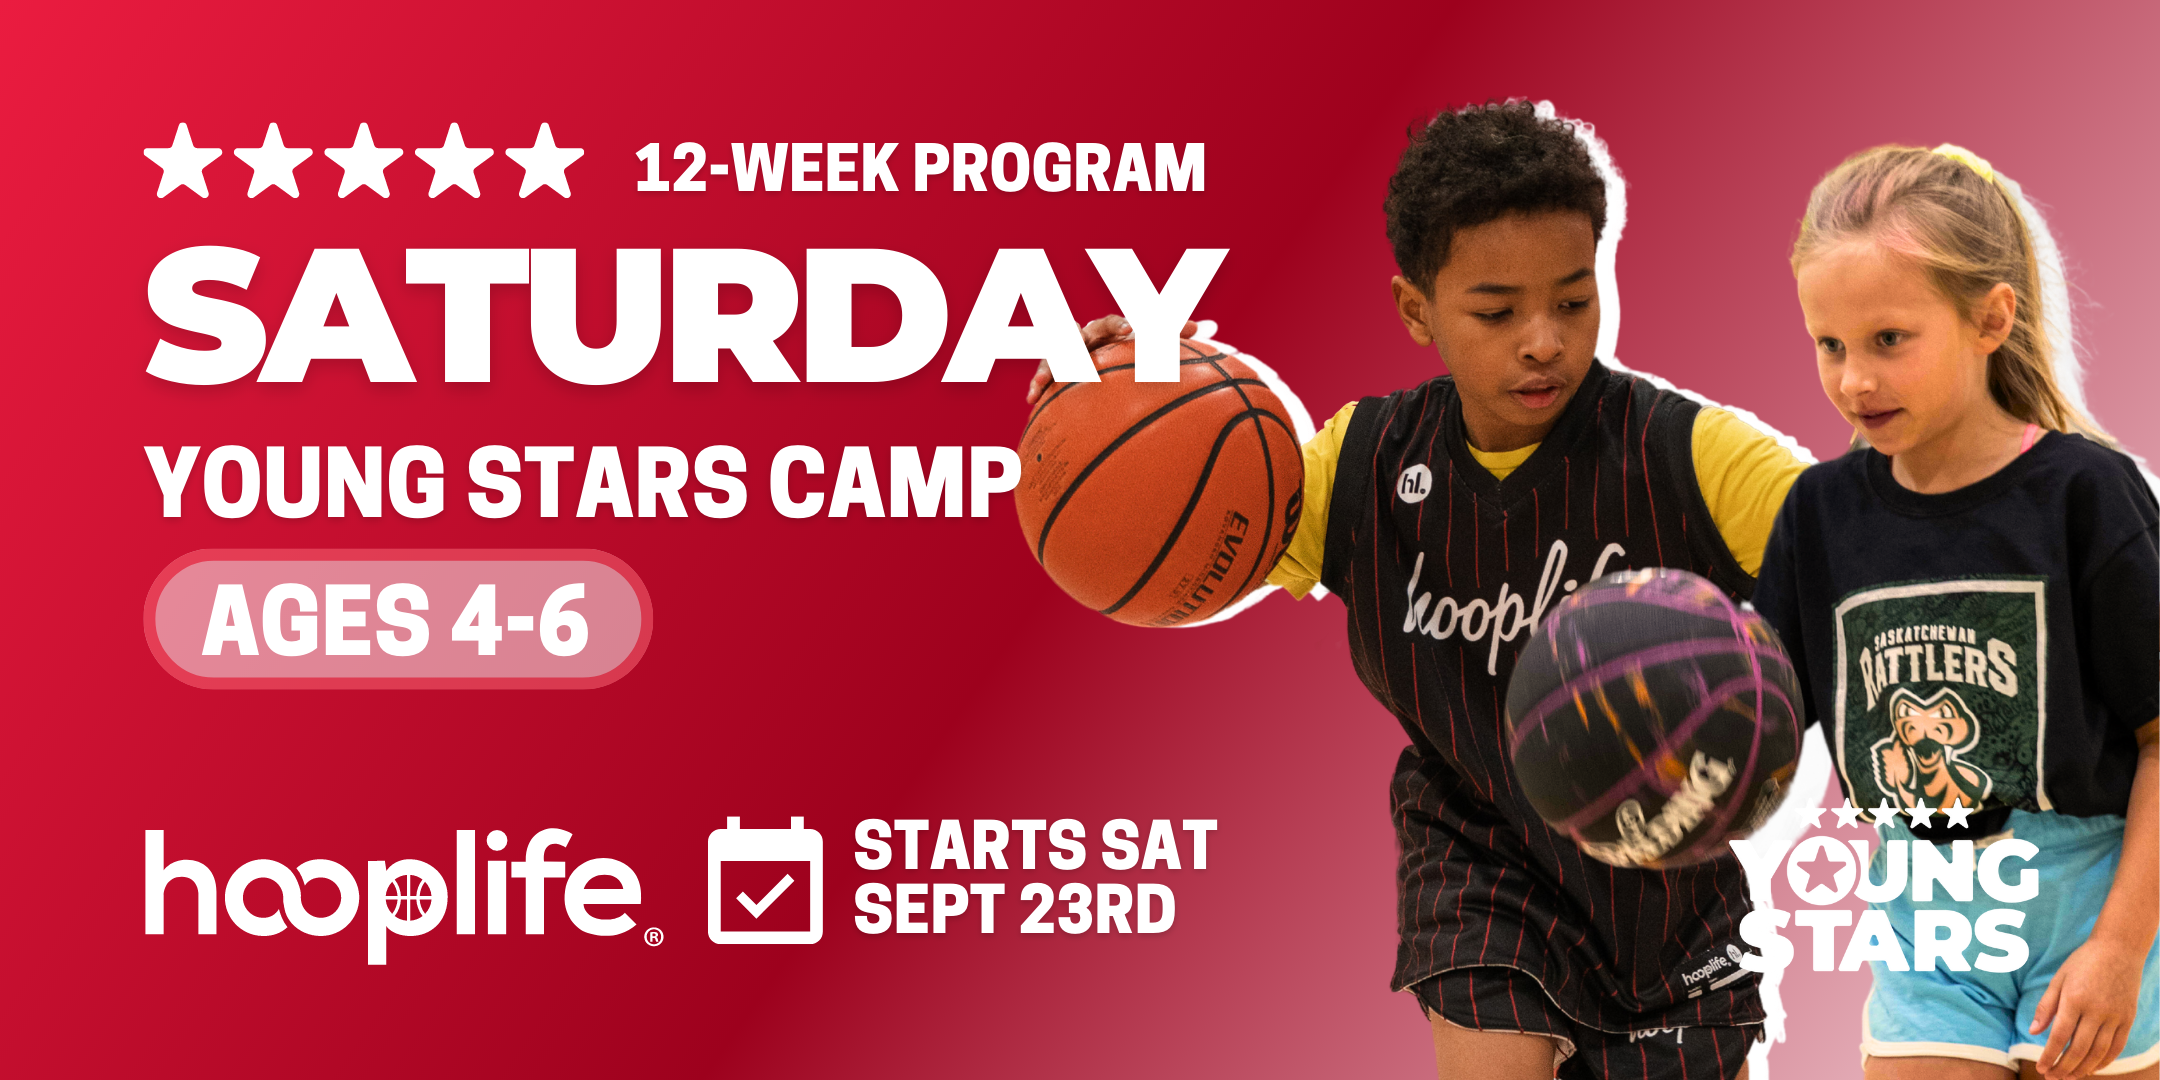 Saturday Ages 4-6 Young Stars 12-Week Camp